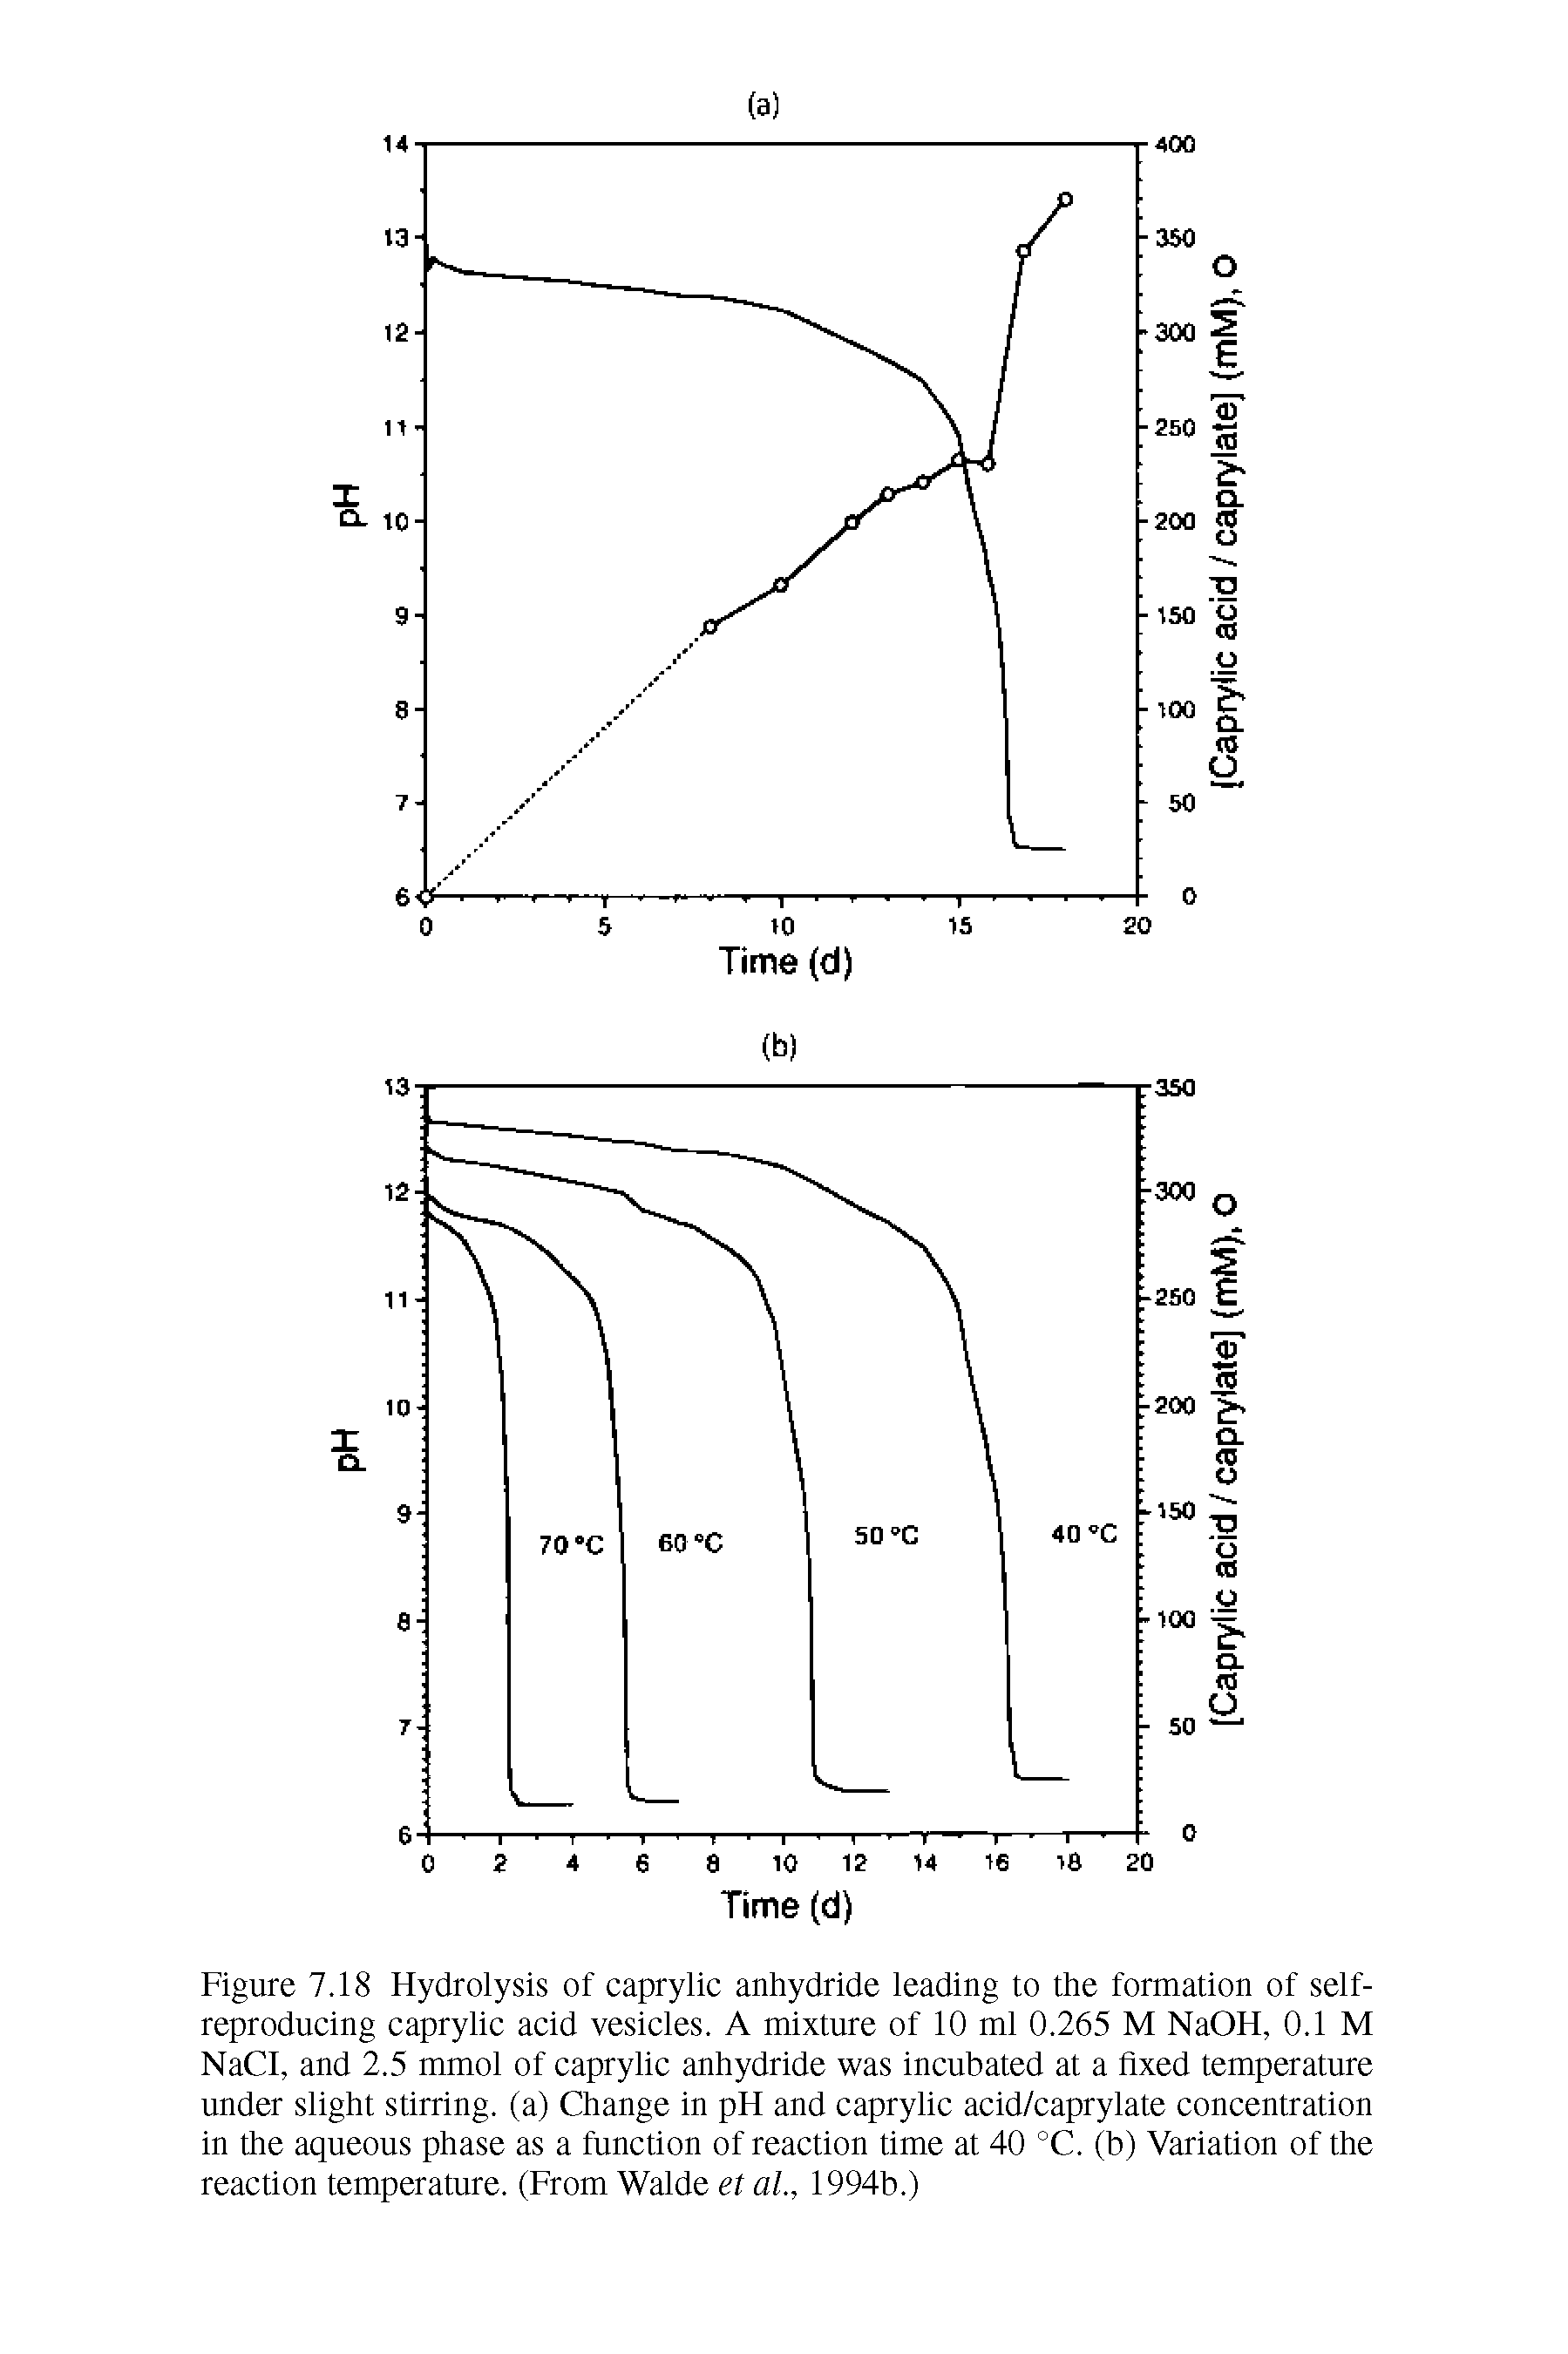 Figure 7.18 Hydrolysis of caprylic anhydride leading to the formation of self-reproducing caprylic acid vesicles. A mixture of 10 ml 0.265 M NaOH, 0.1 M NaCI, and 2.5 mmol of caprylic anhydride was incubated at a fixed temperature under slight stirring, (a) Change in pH and caprylic acid/caprylate concentration in the aqueous phase as a function of reaction time at 40 °C. (b) Variation of the reaction temperature. (From Walde et al, 1994b.)...